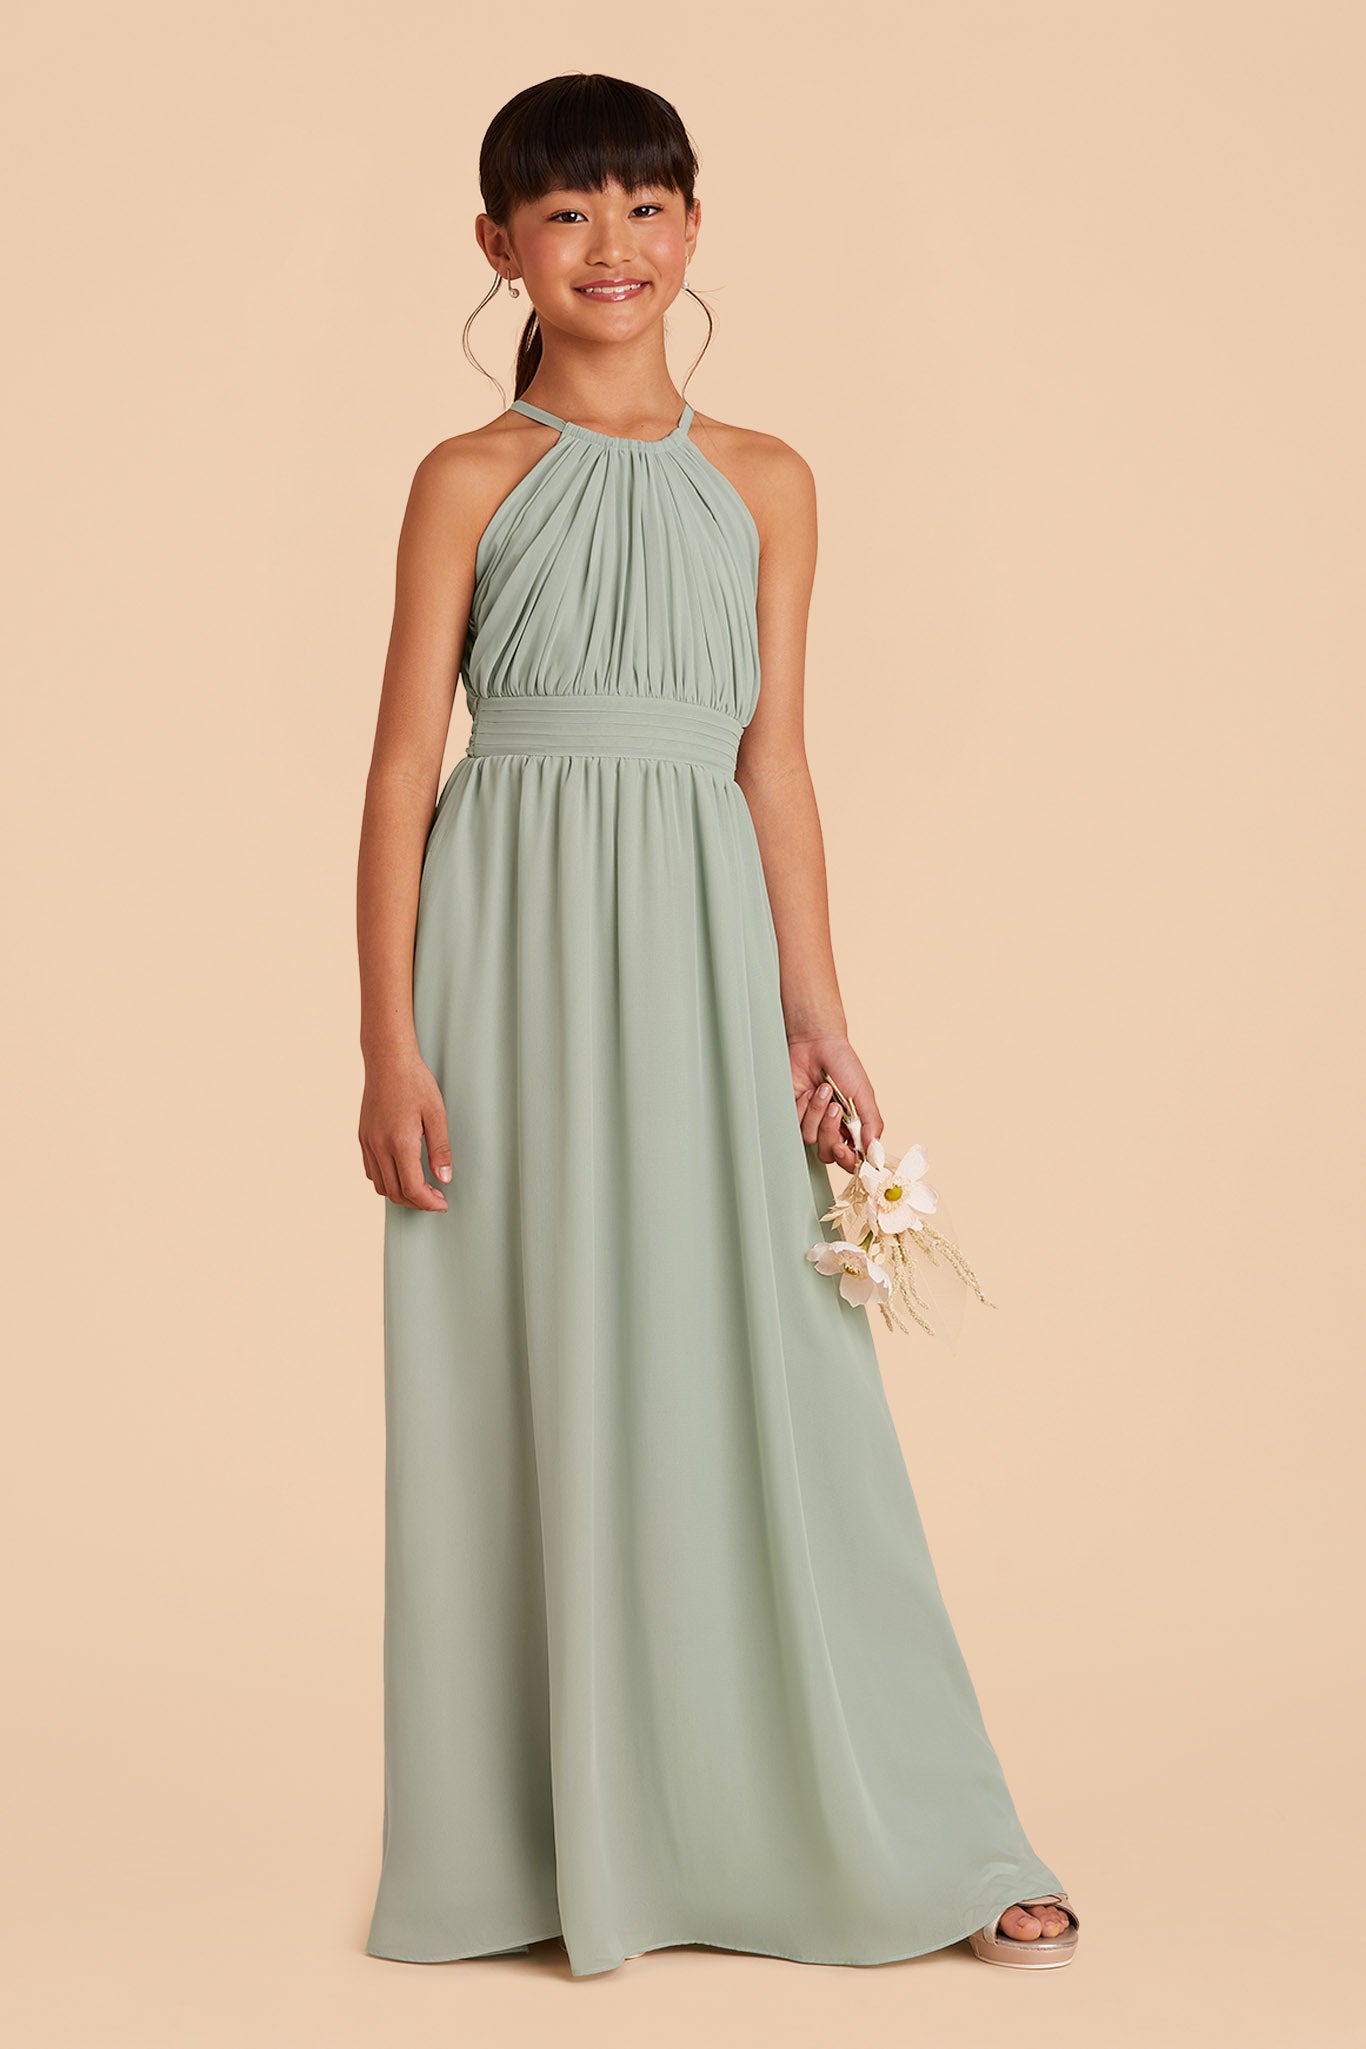 Bridesmaid Dresses for 13 Year Olds